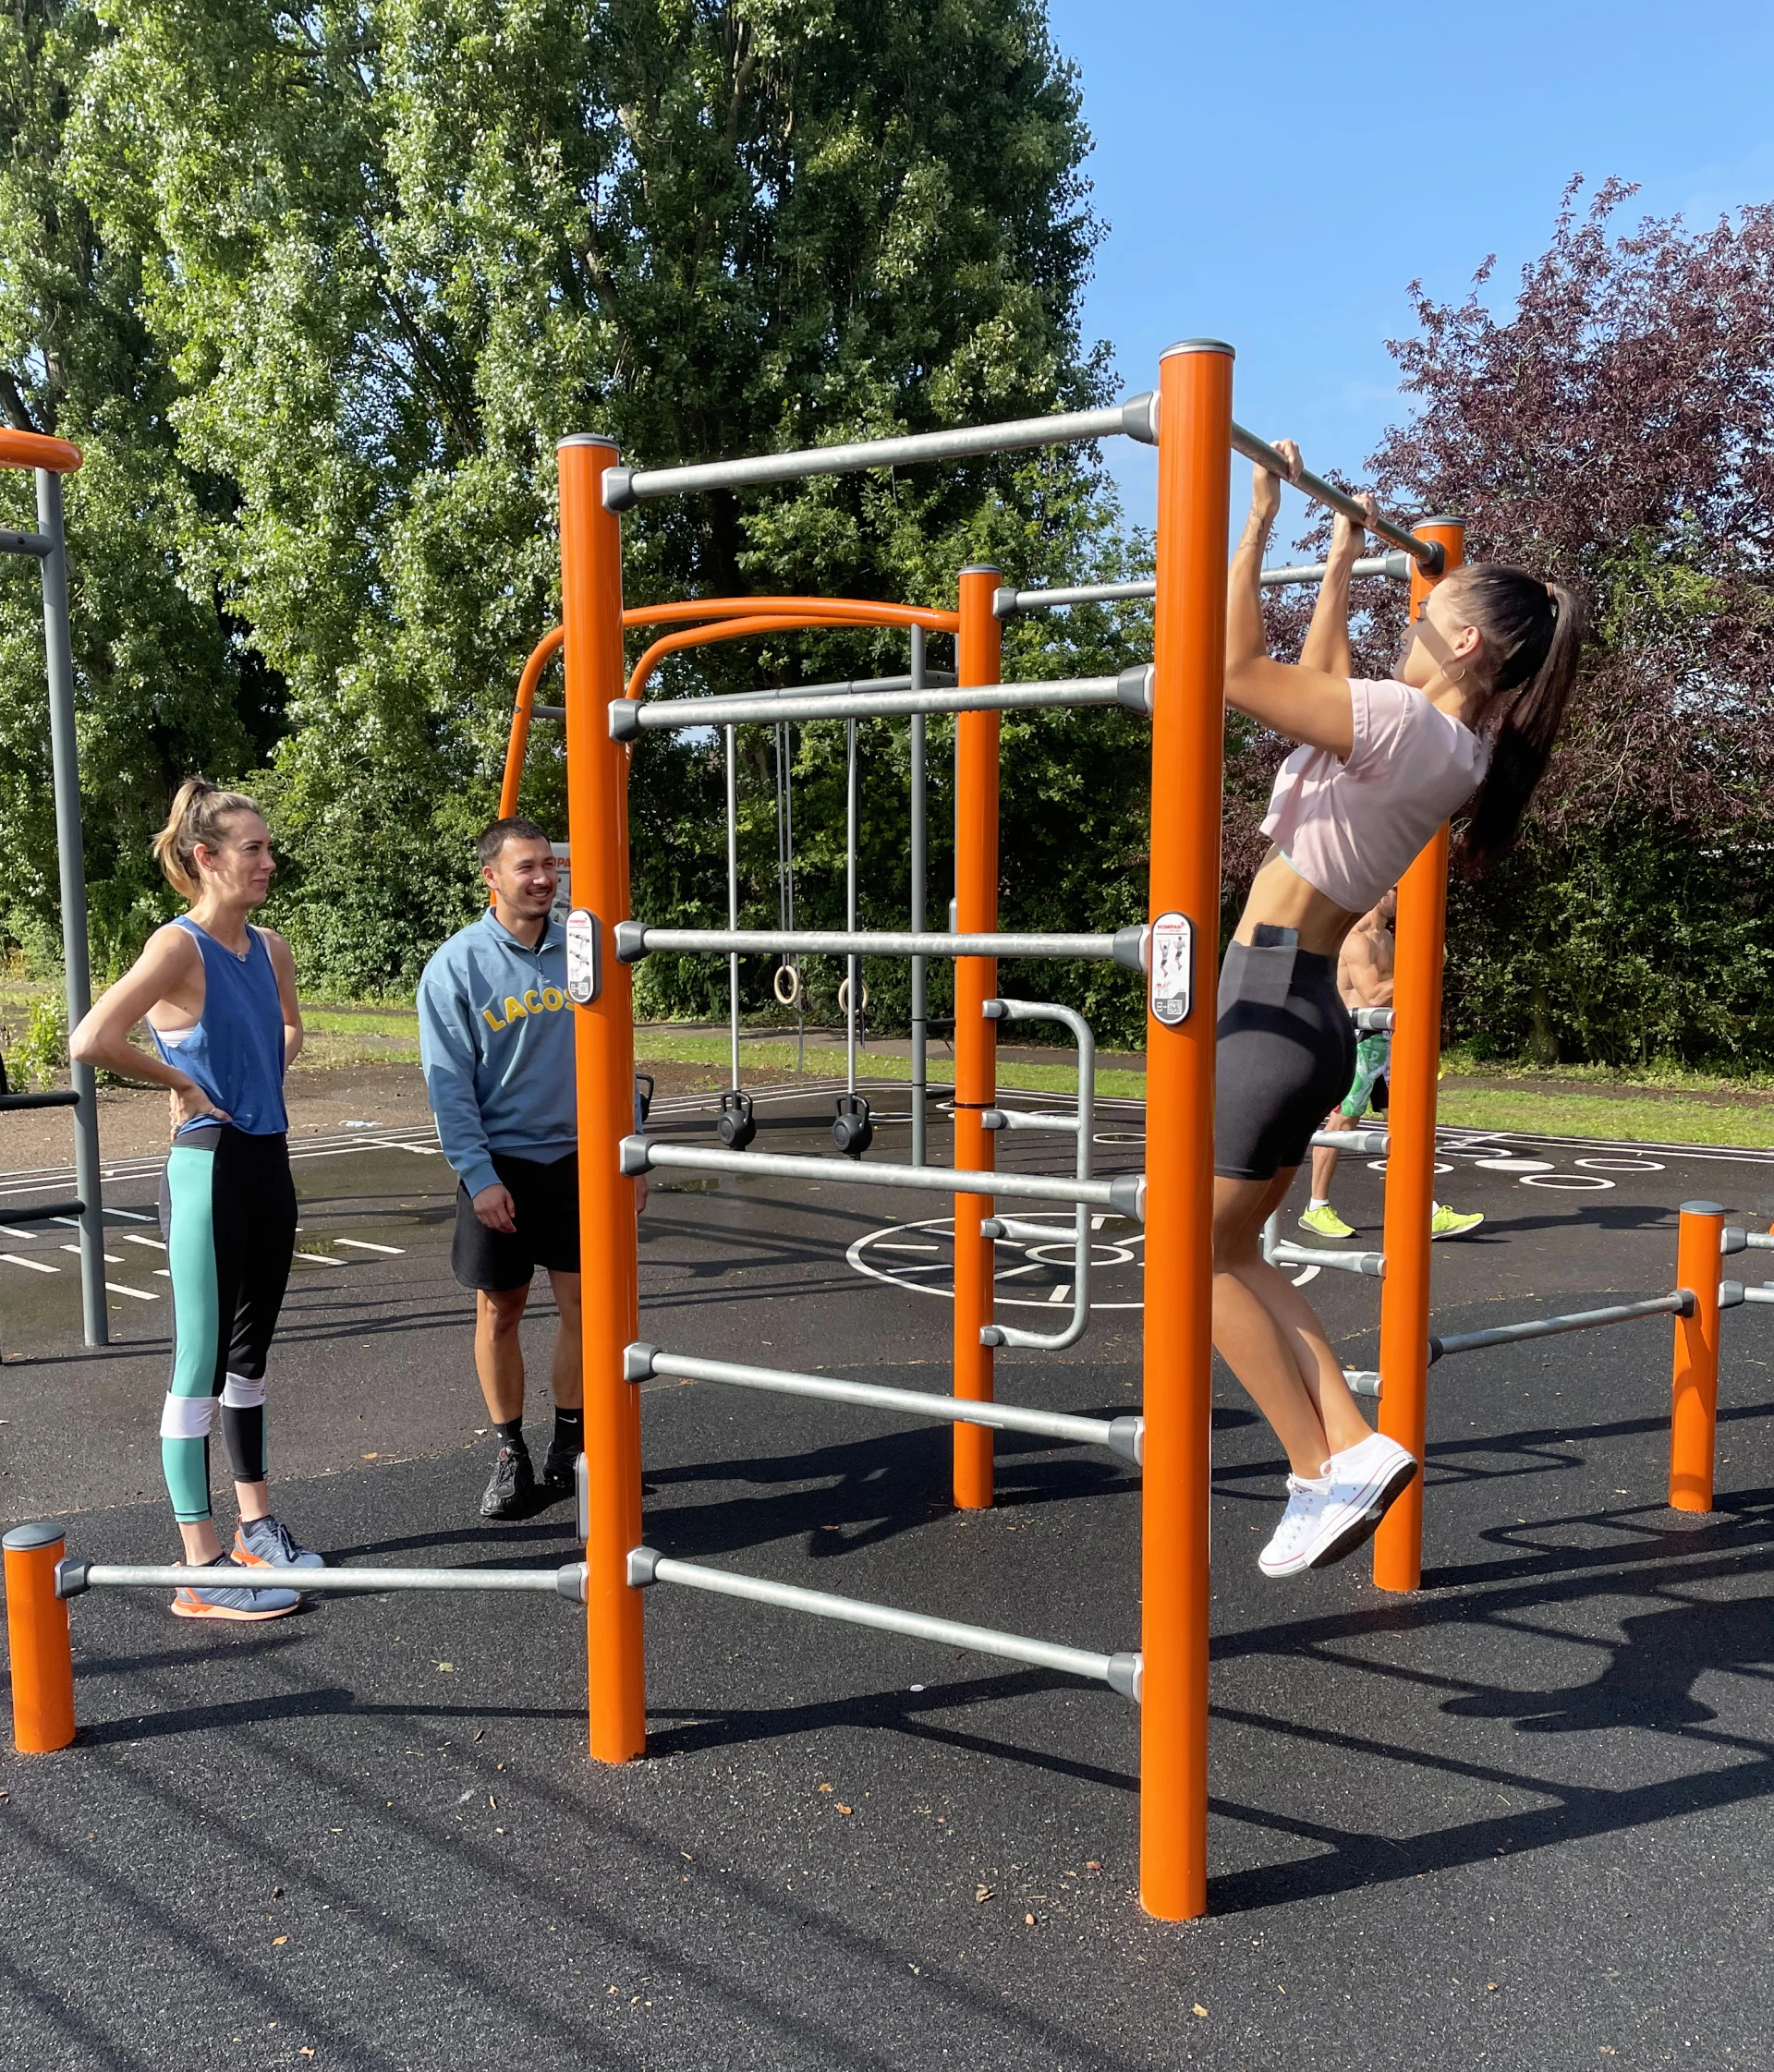 students working out at a outdoor gym at their university